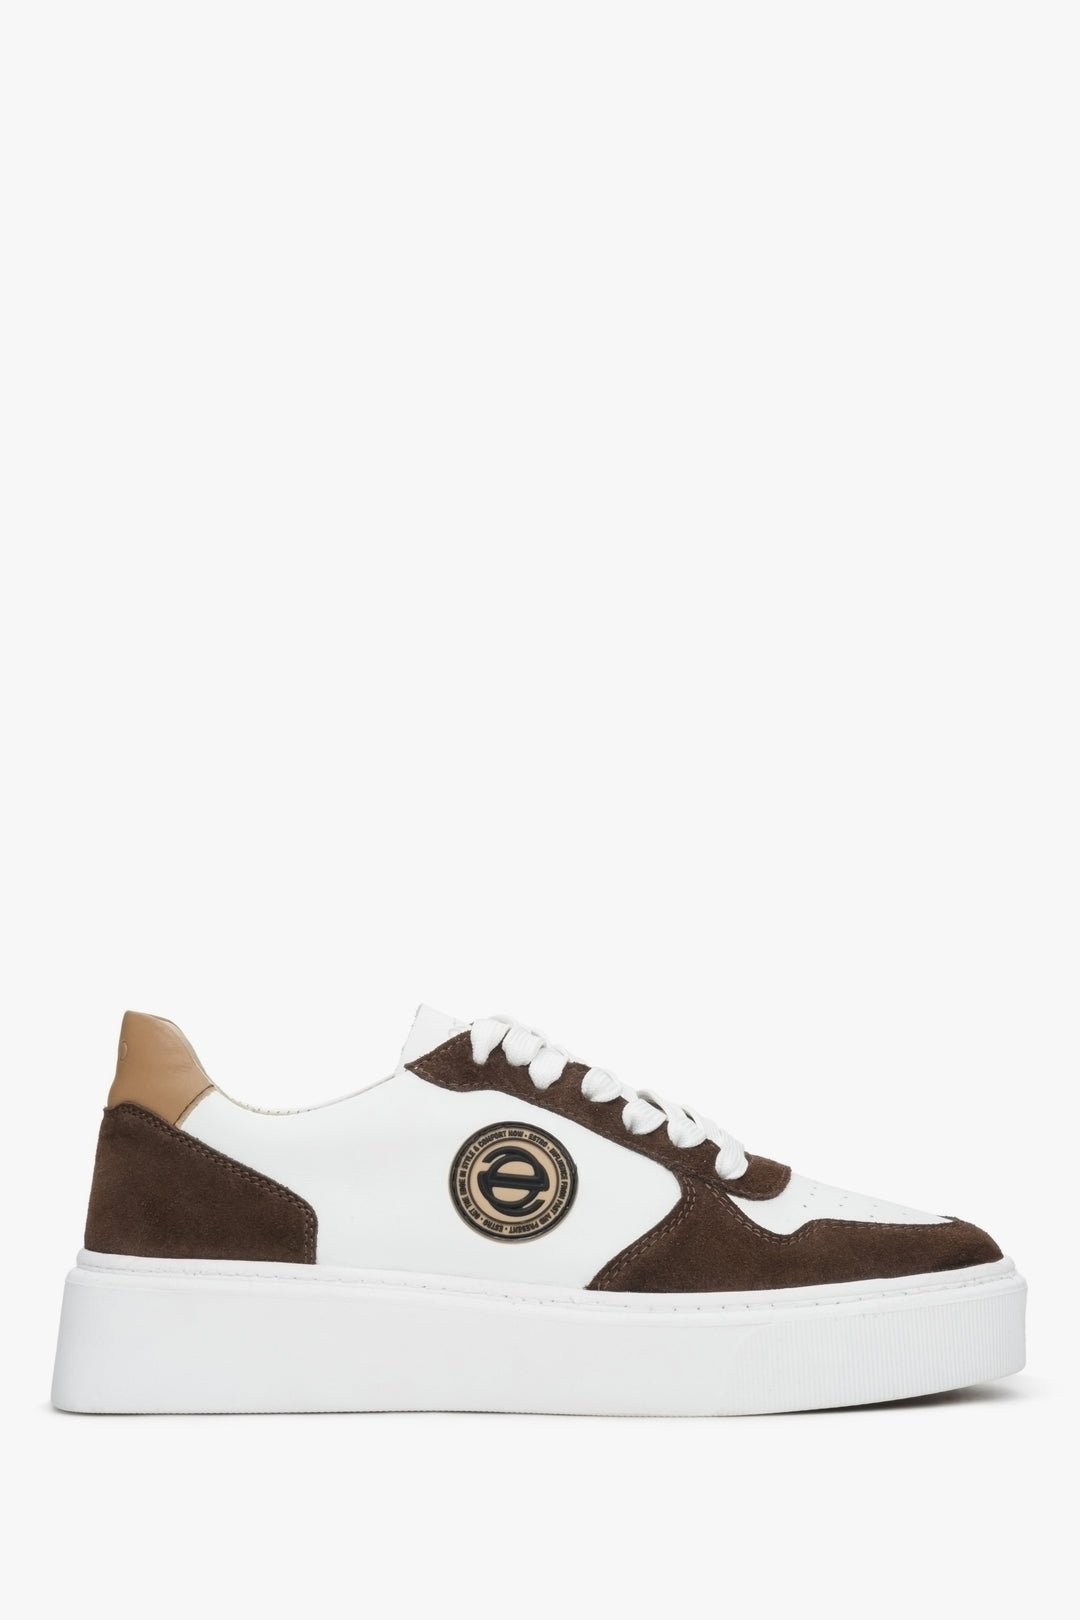 Women's Brown and White Leather Sneakers Estro ER00113061